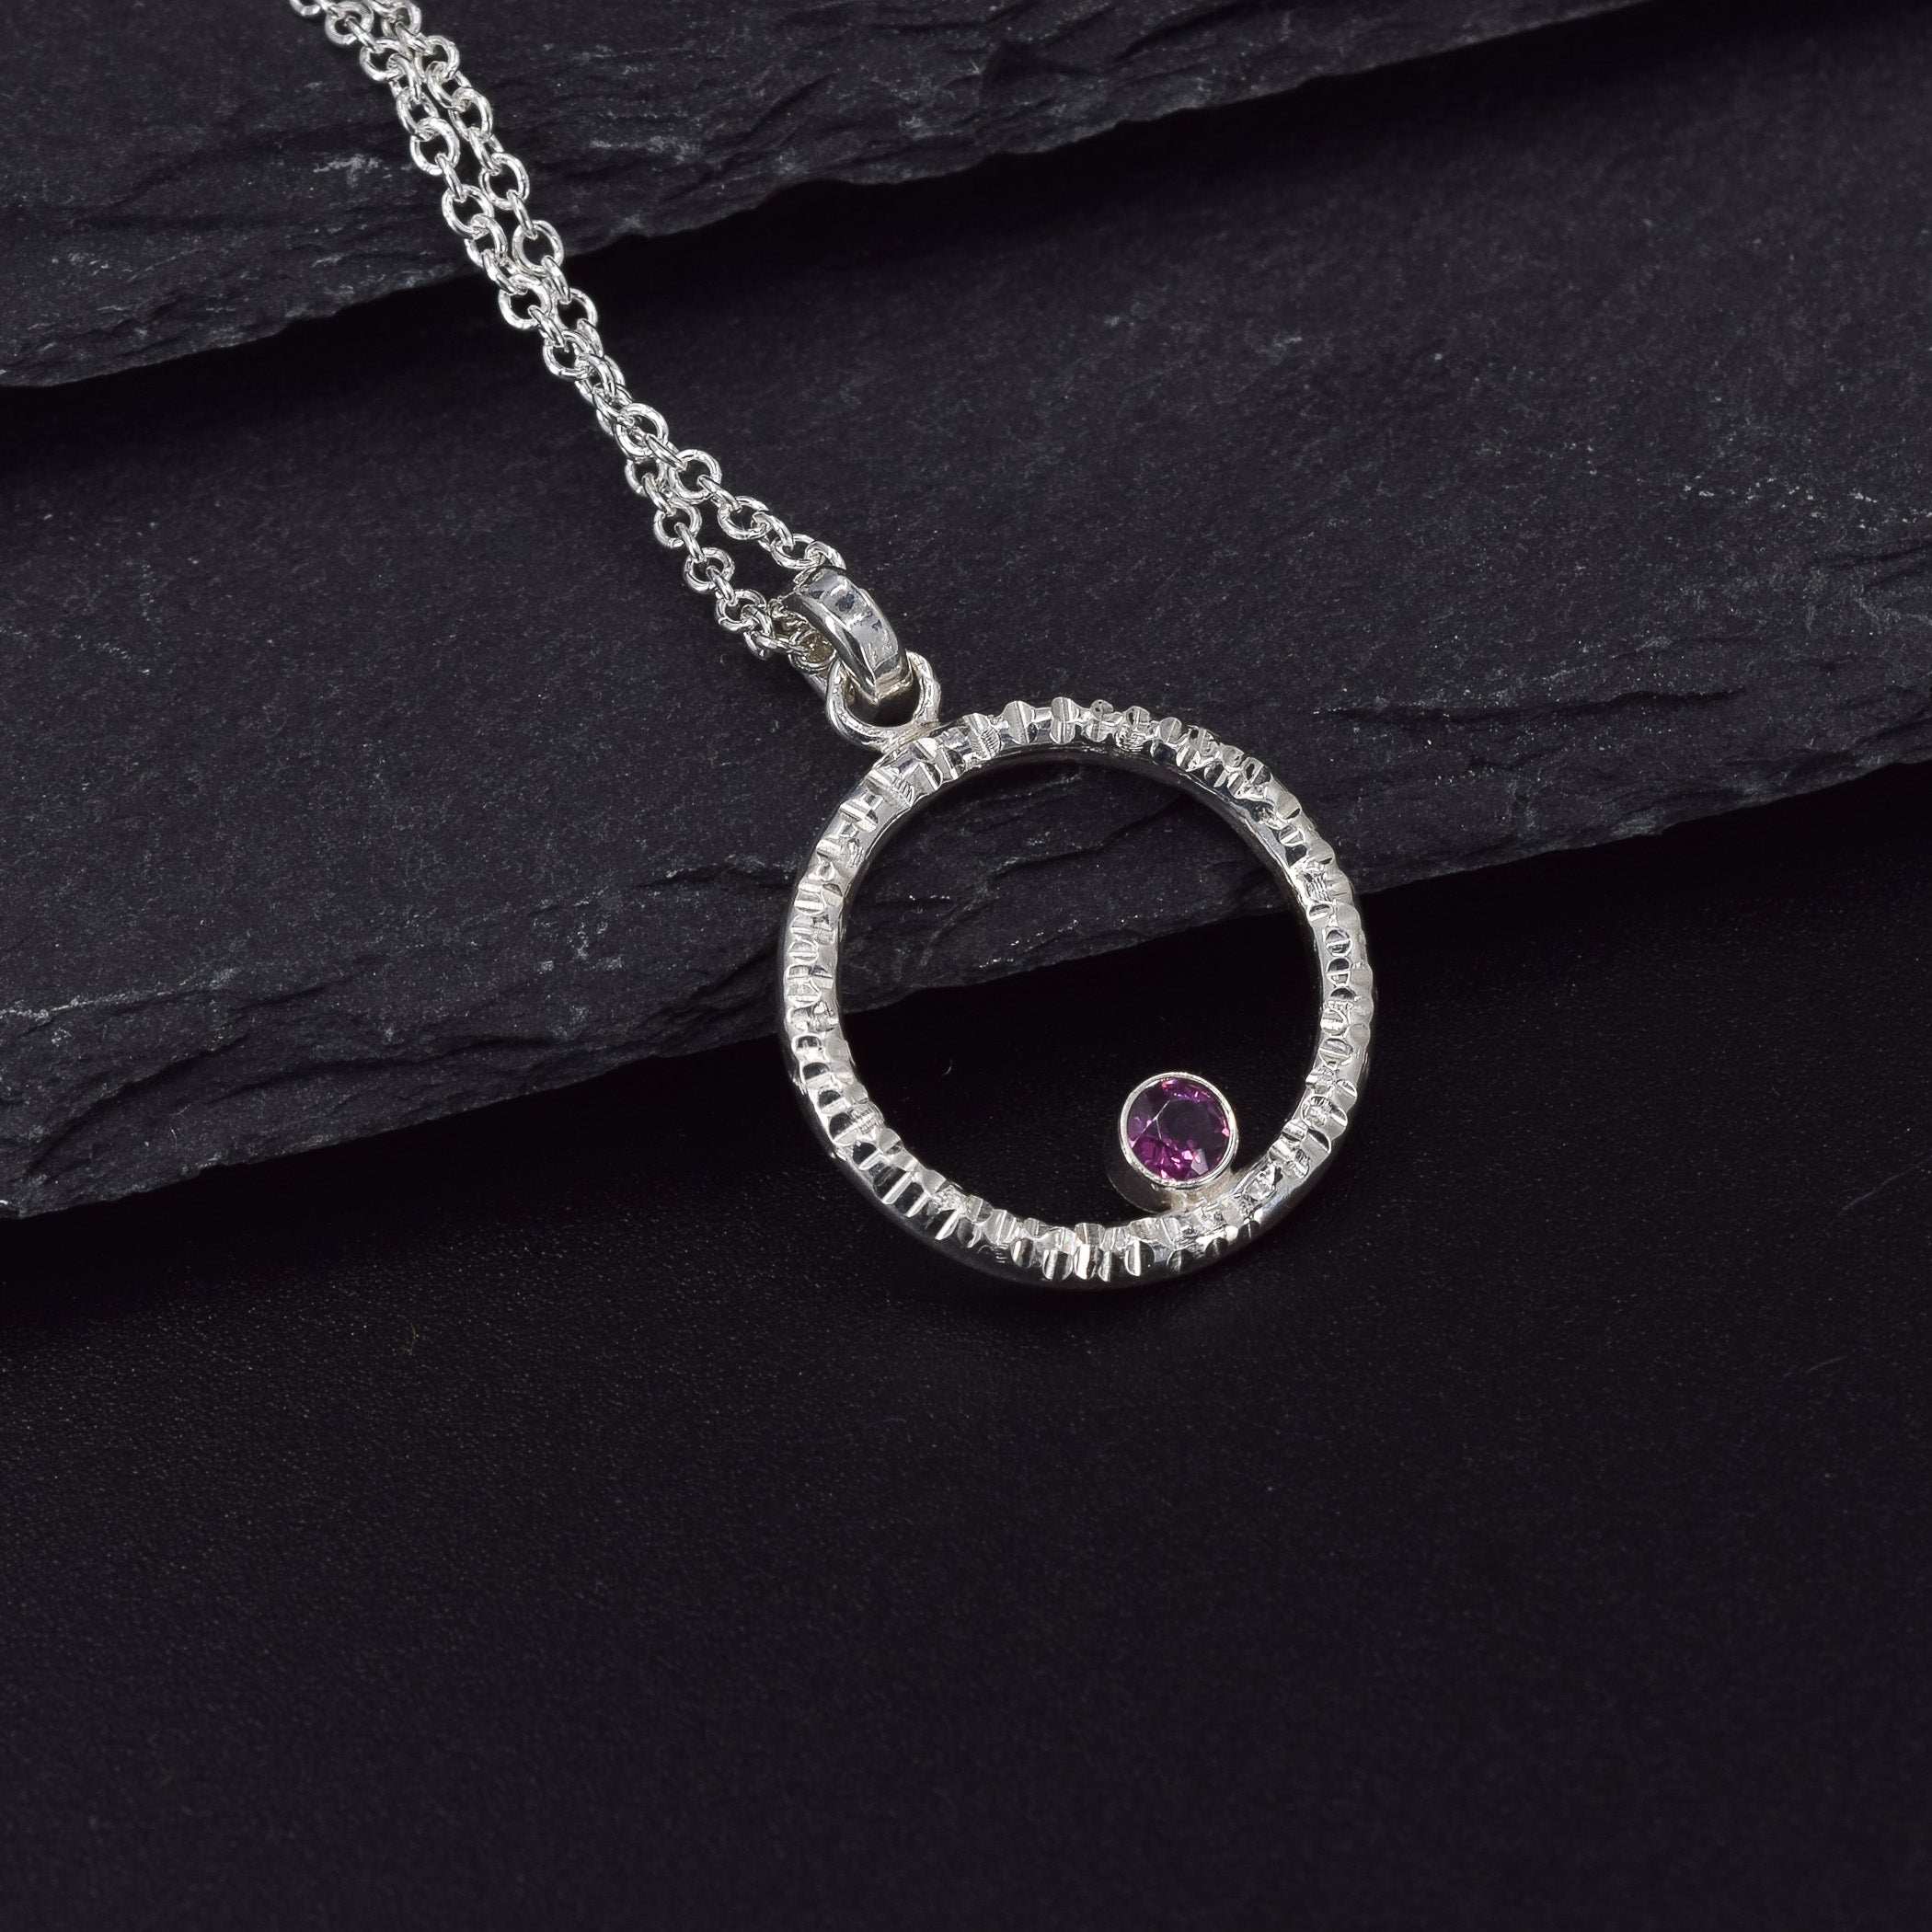 Circle of life pendant necklace in sterling silver with textured edges, featuring a rhodolite garnet faceted stone leaning against a slate piece